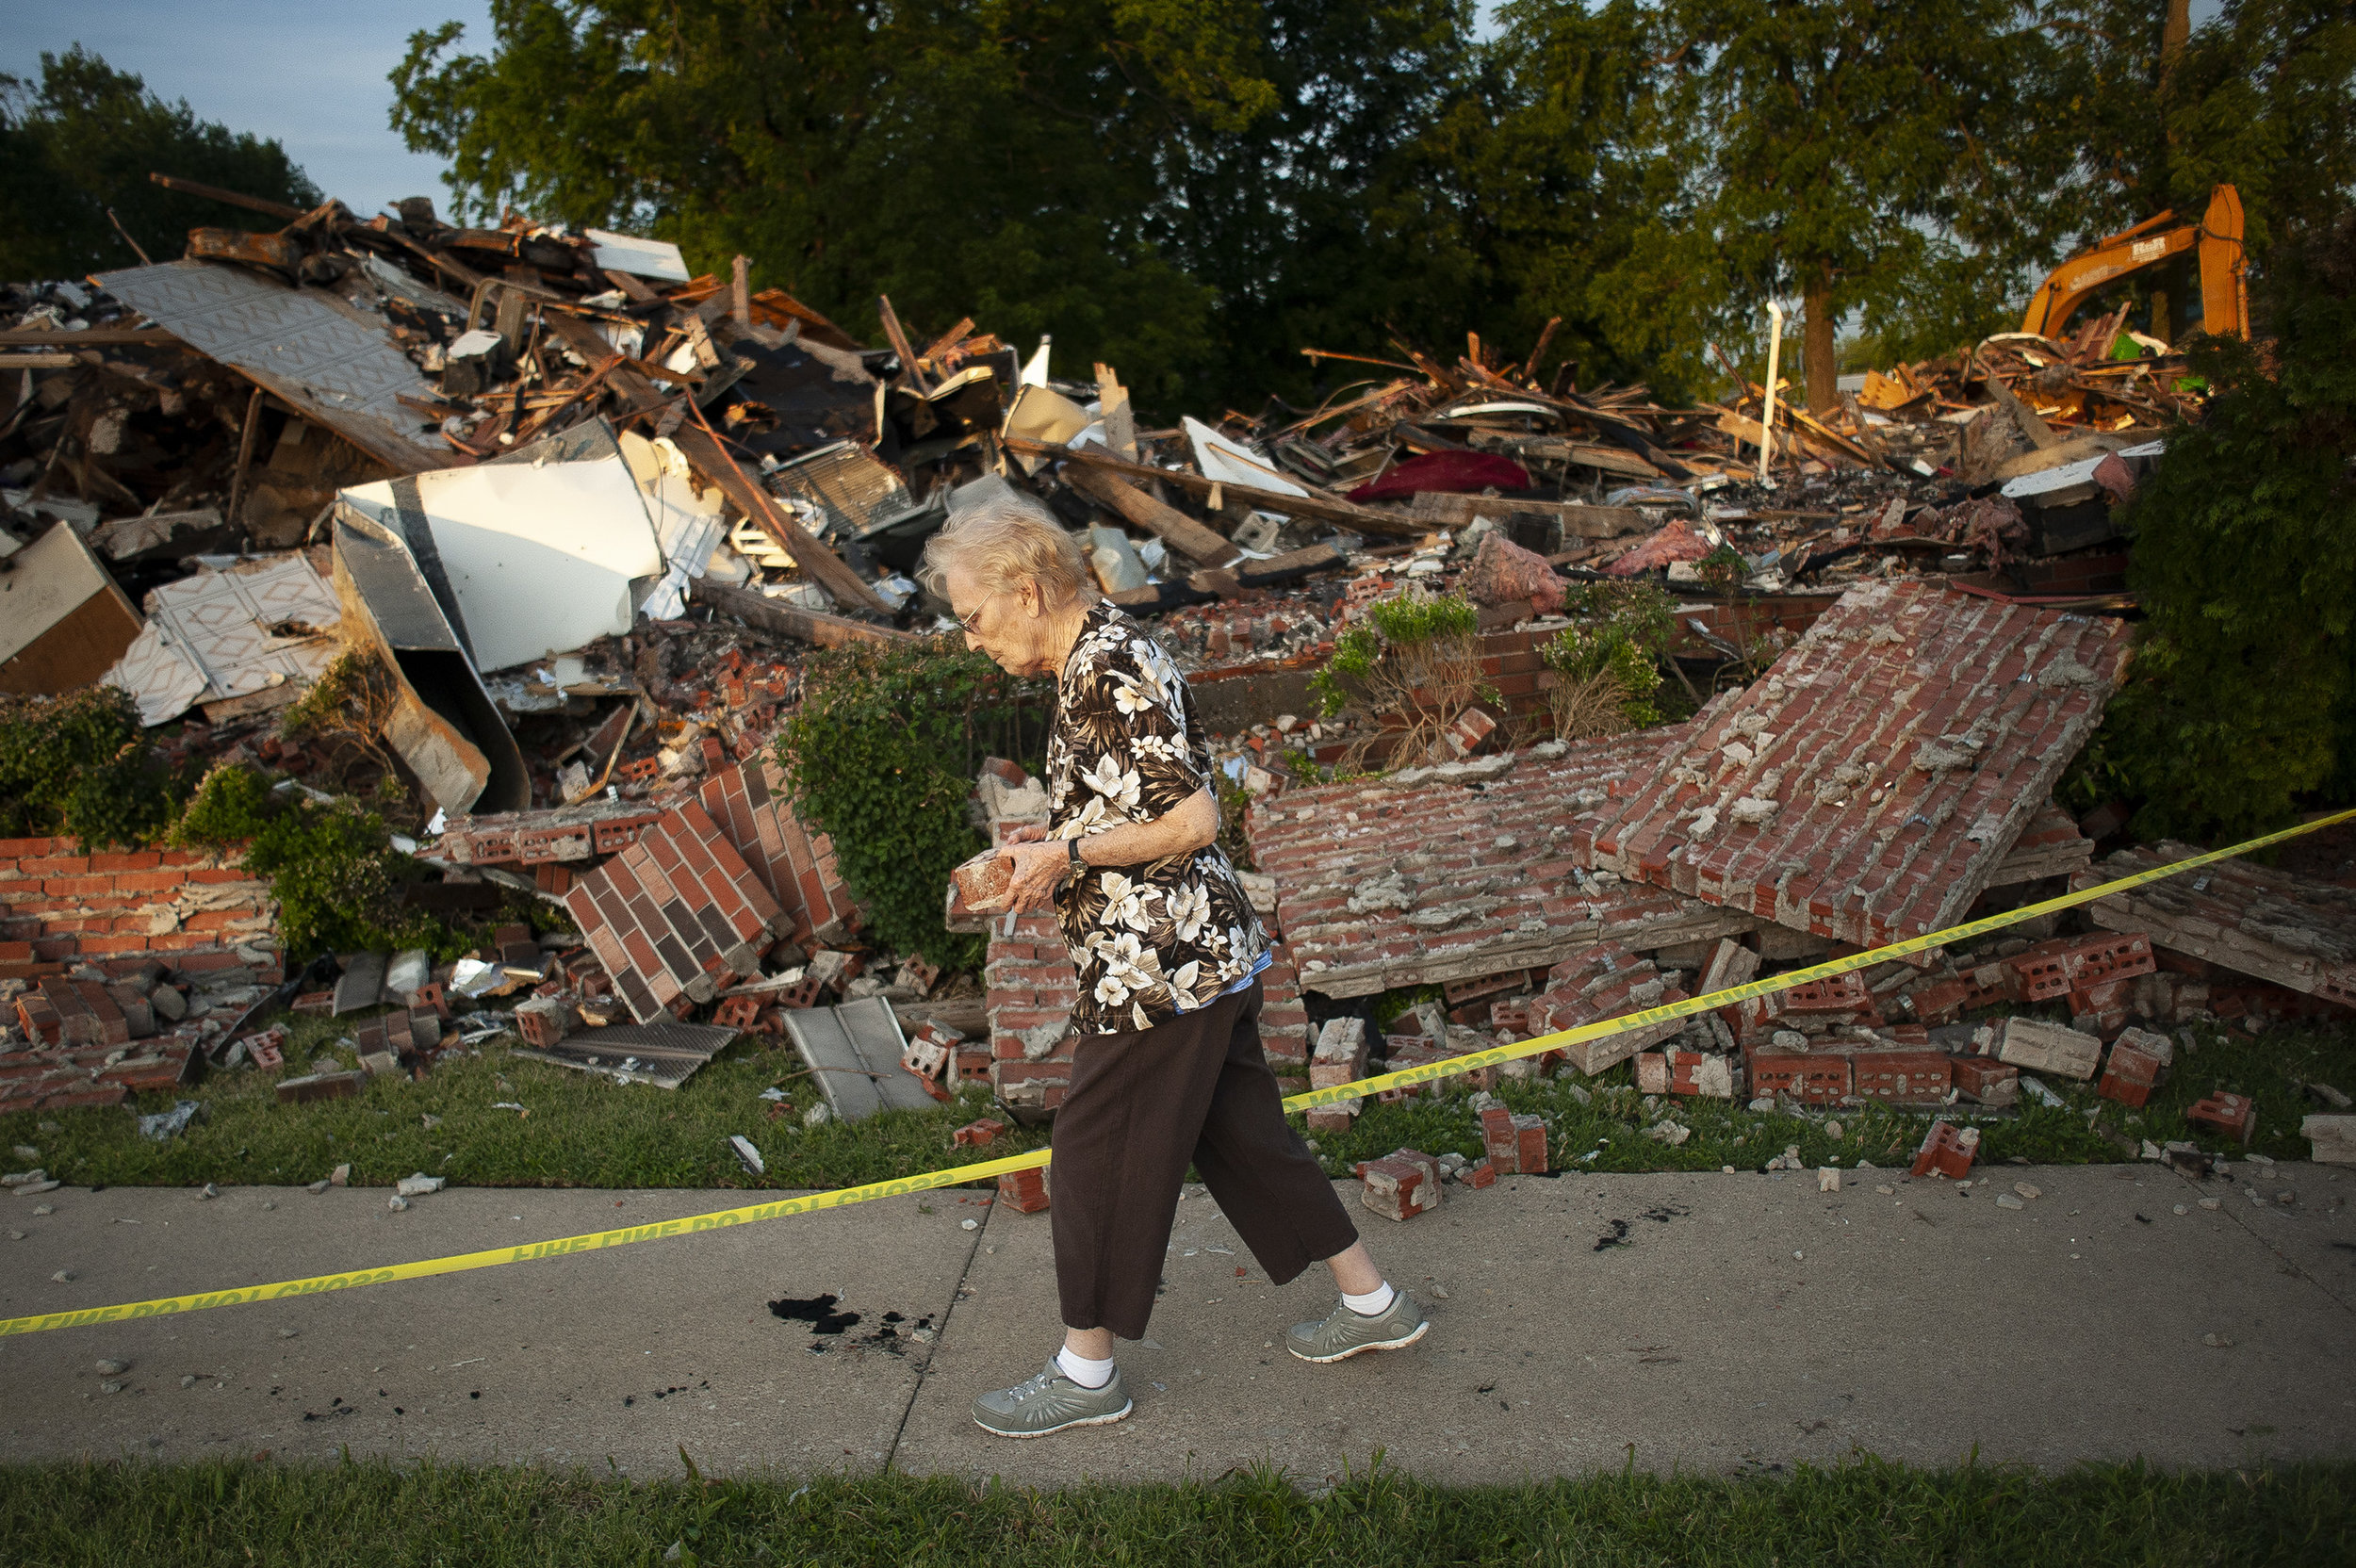  Arleen Tipsword, who at age 90 believes herself to be the oldest member of Cornerstone Wesleyan Church, takes a brick as a souvenir from the remains of the church June 22 at 210 E. Outer Road in Scott City, Missouri. "It's heartbreaking," Tipsword s